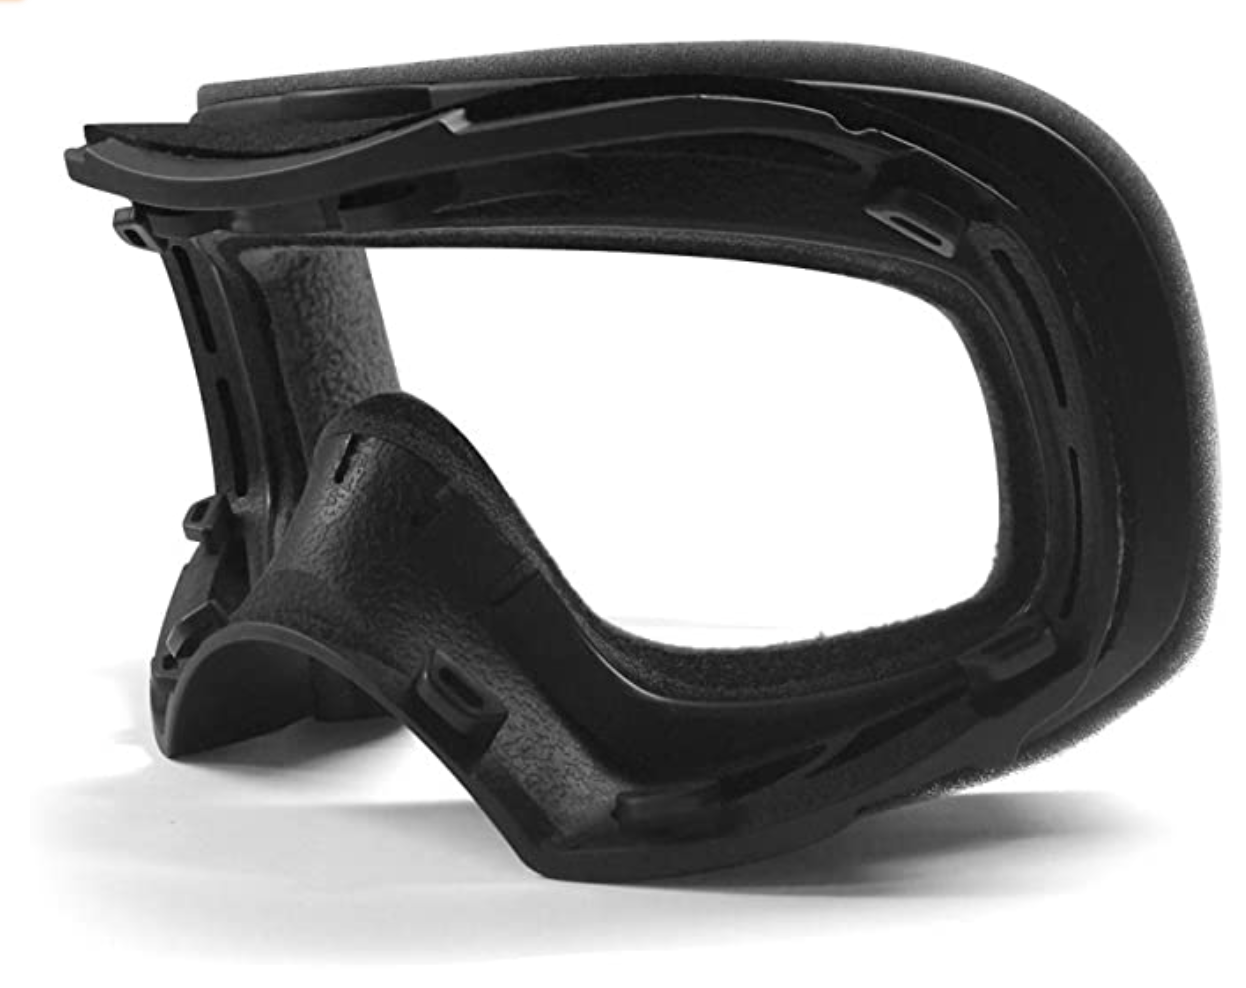 OAKLEY - AIRBRAKE MX REPLACEMENT FRAME